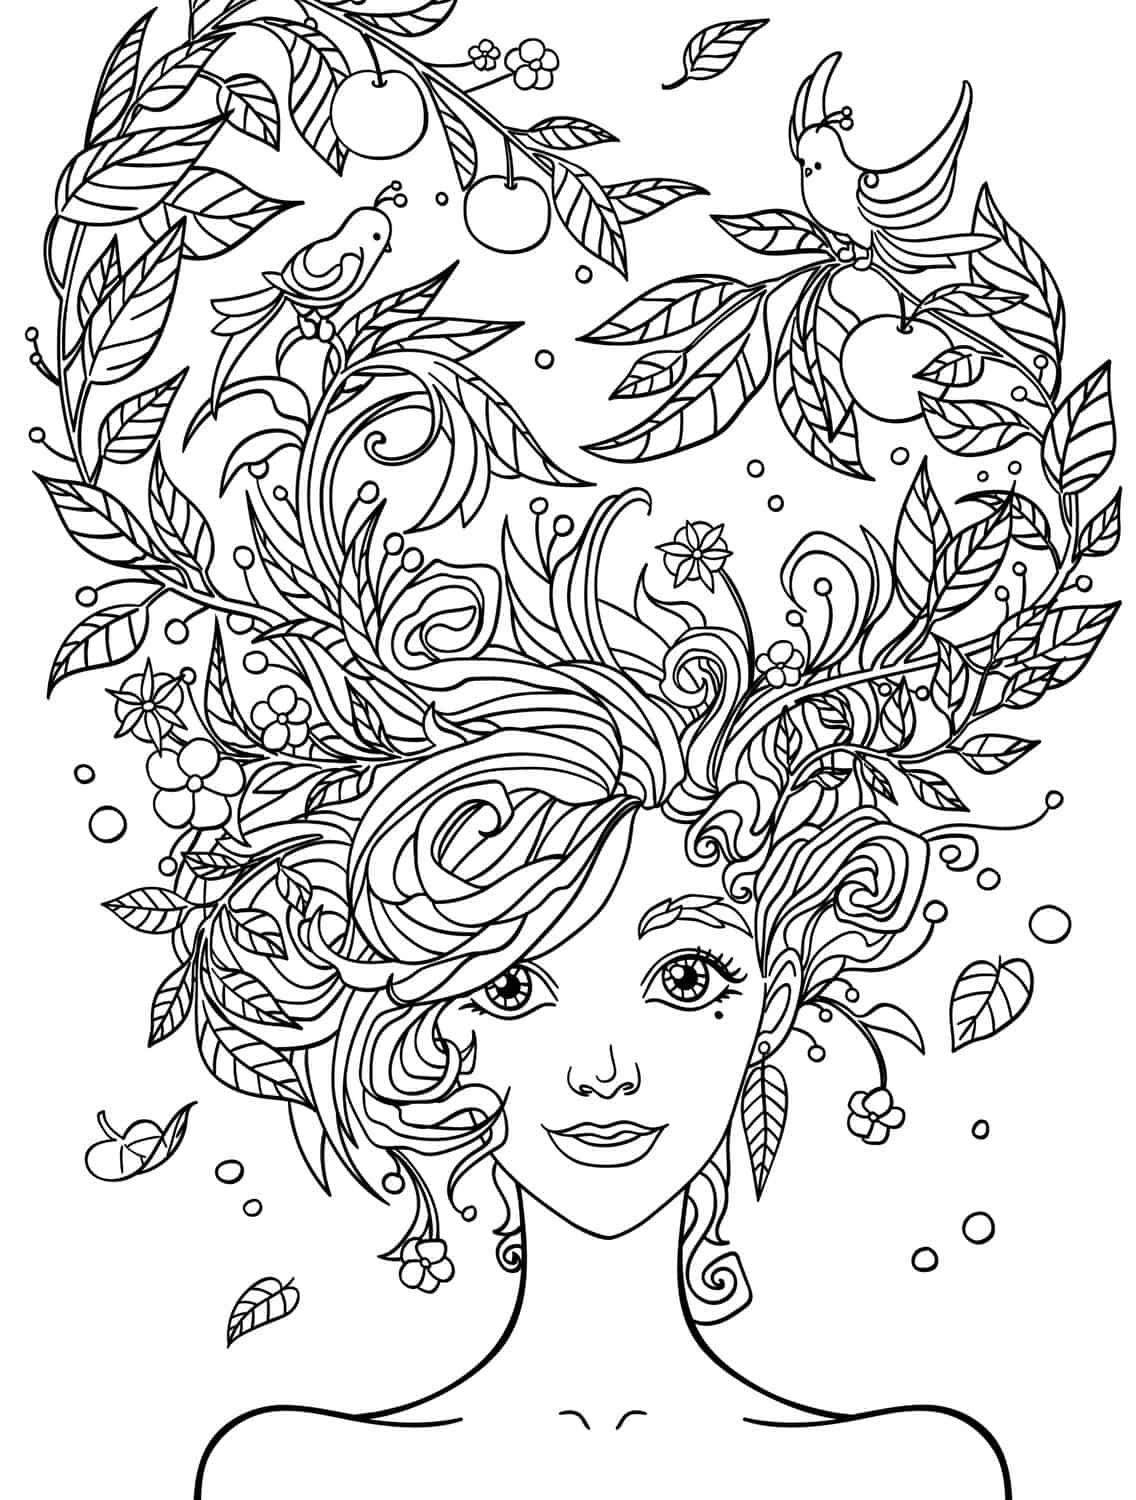 Coloring Pages For Adult Girls
 10 Crazy Hair Adult Coloring Pages Page 5 of 12 Nerdy